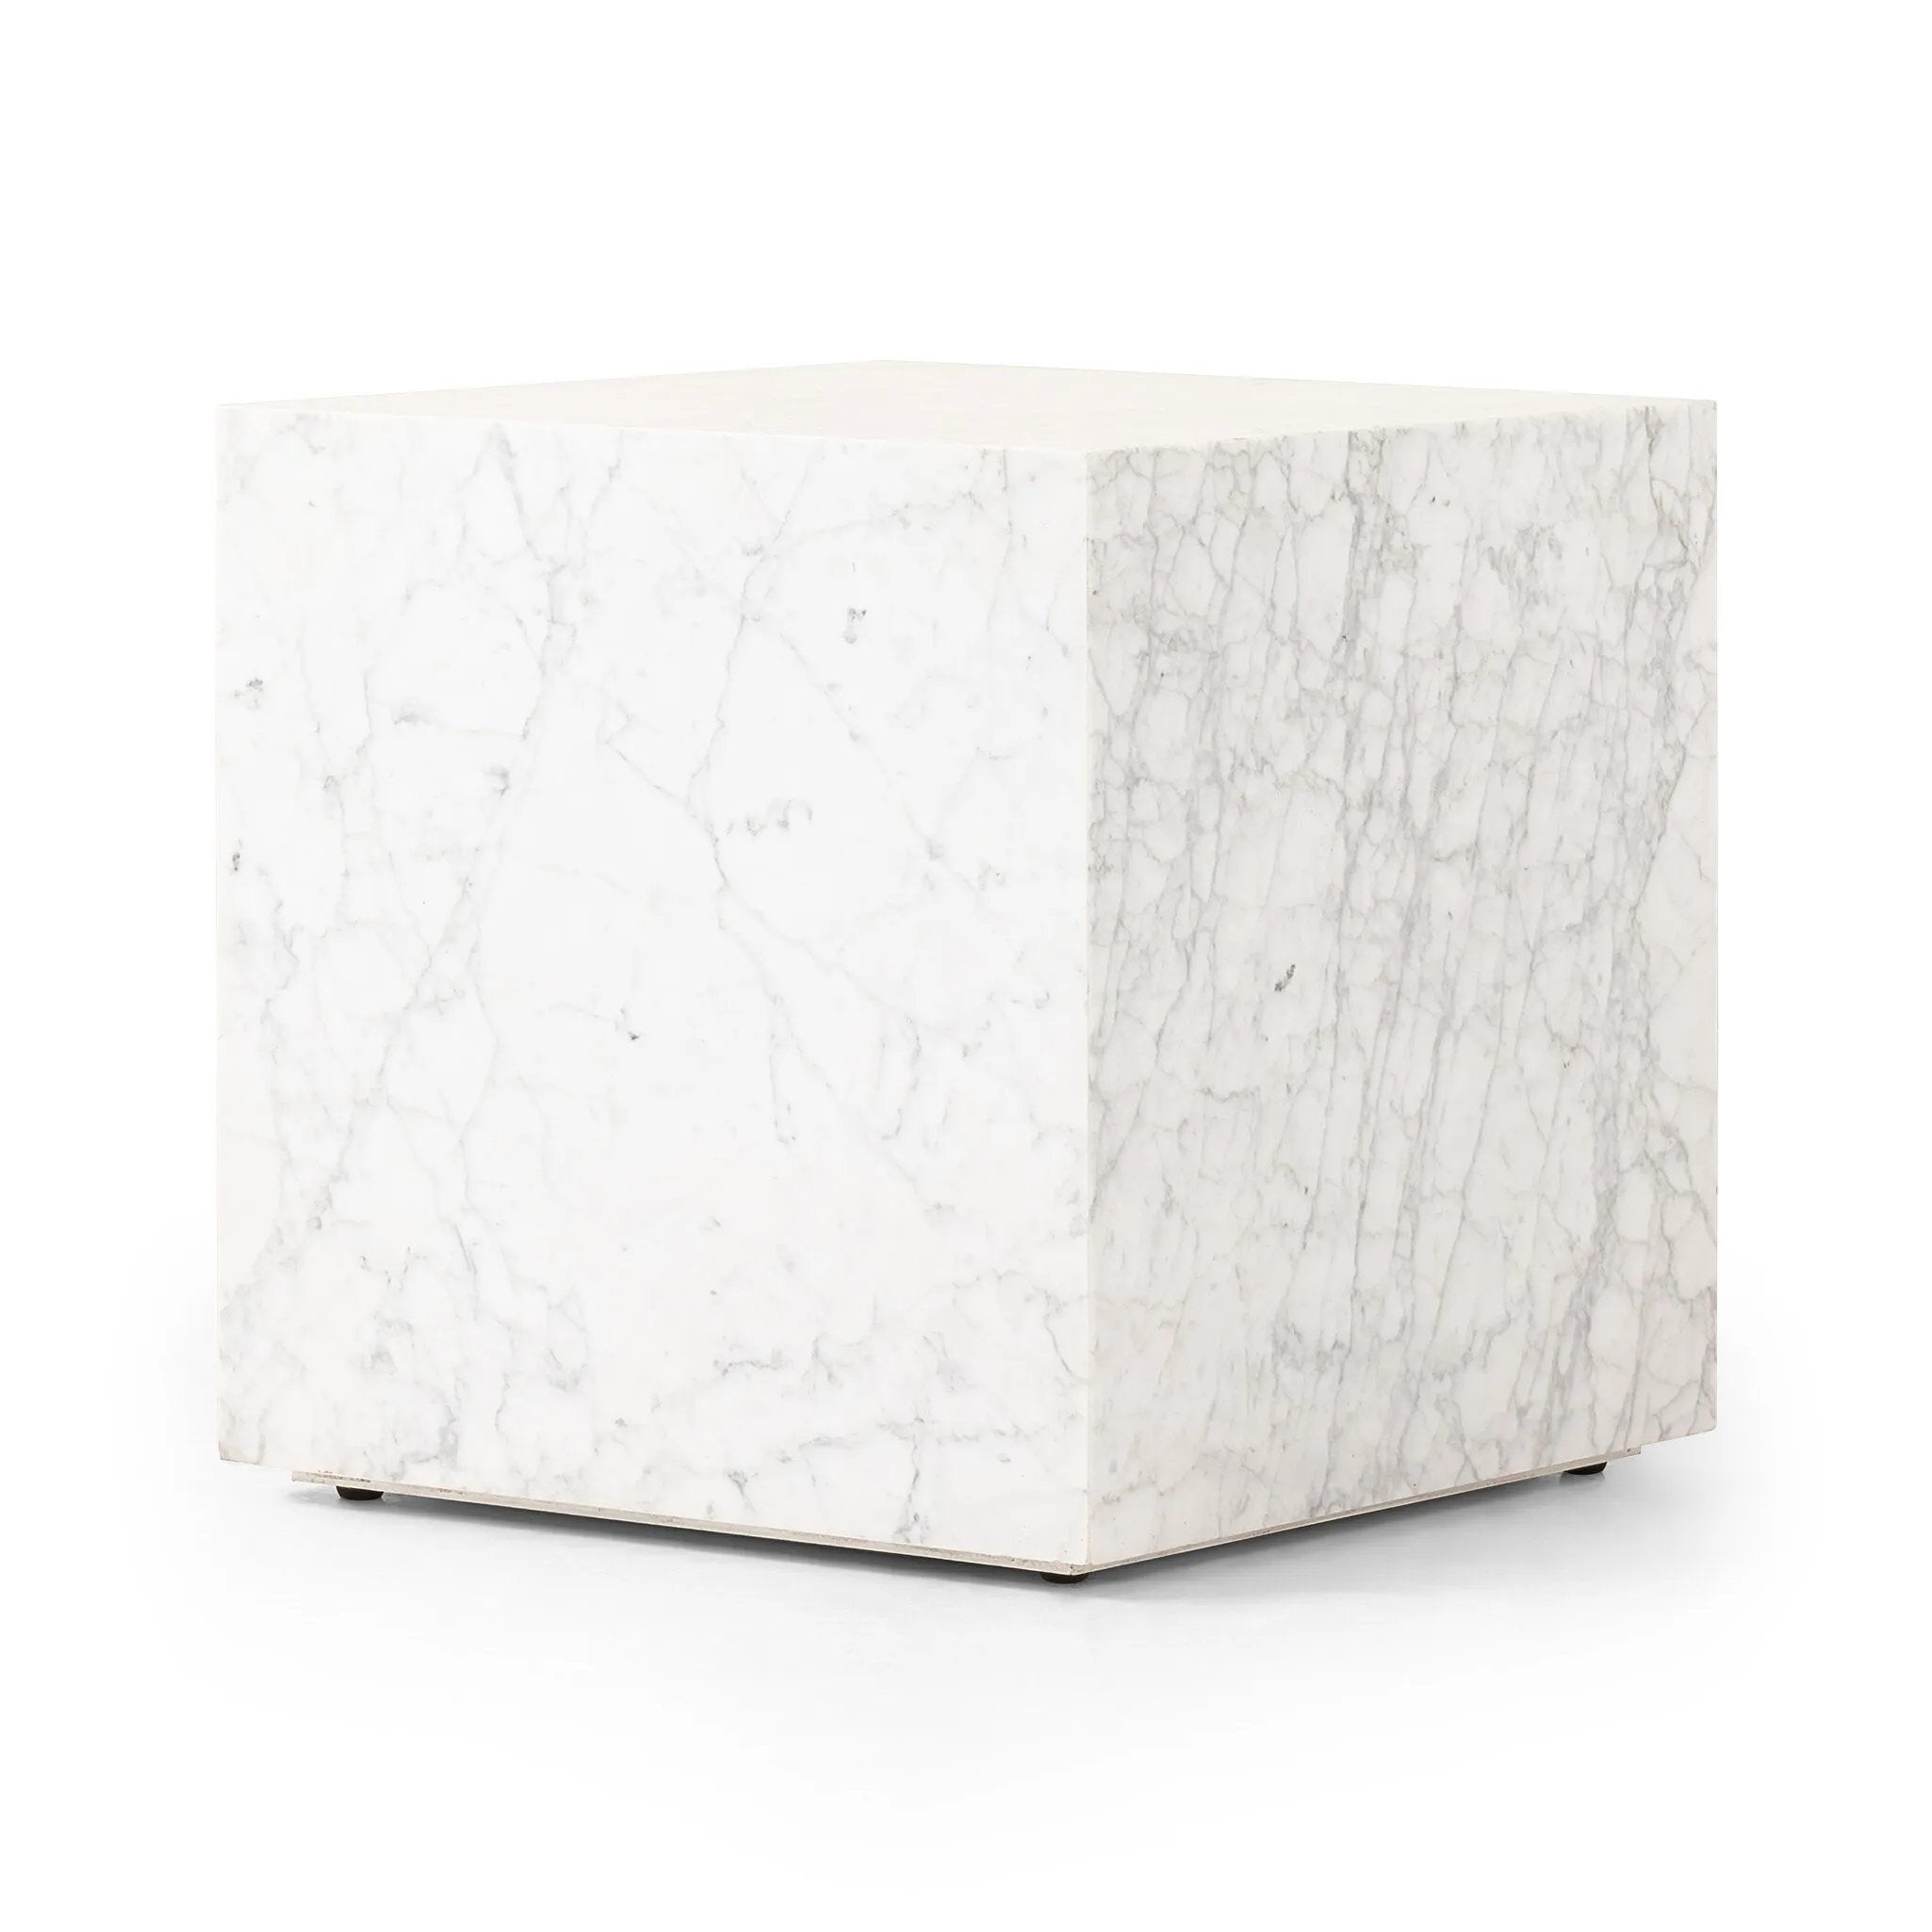 A study in simplicity. Carved from Carrara marble for a clean, modern statement in any space.Collection: Hughe Amethyst Home provides interior design, new home construction design consulting, vintage area rugs, and lighting in the Tampa metro area.